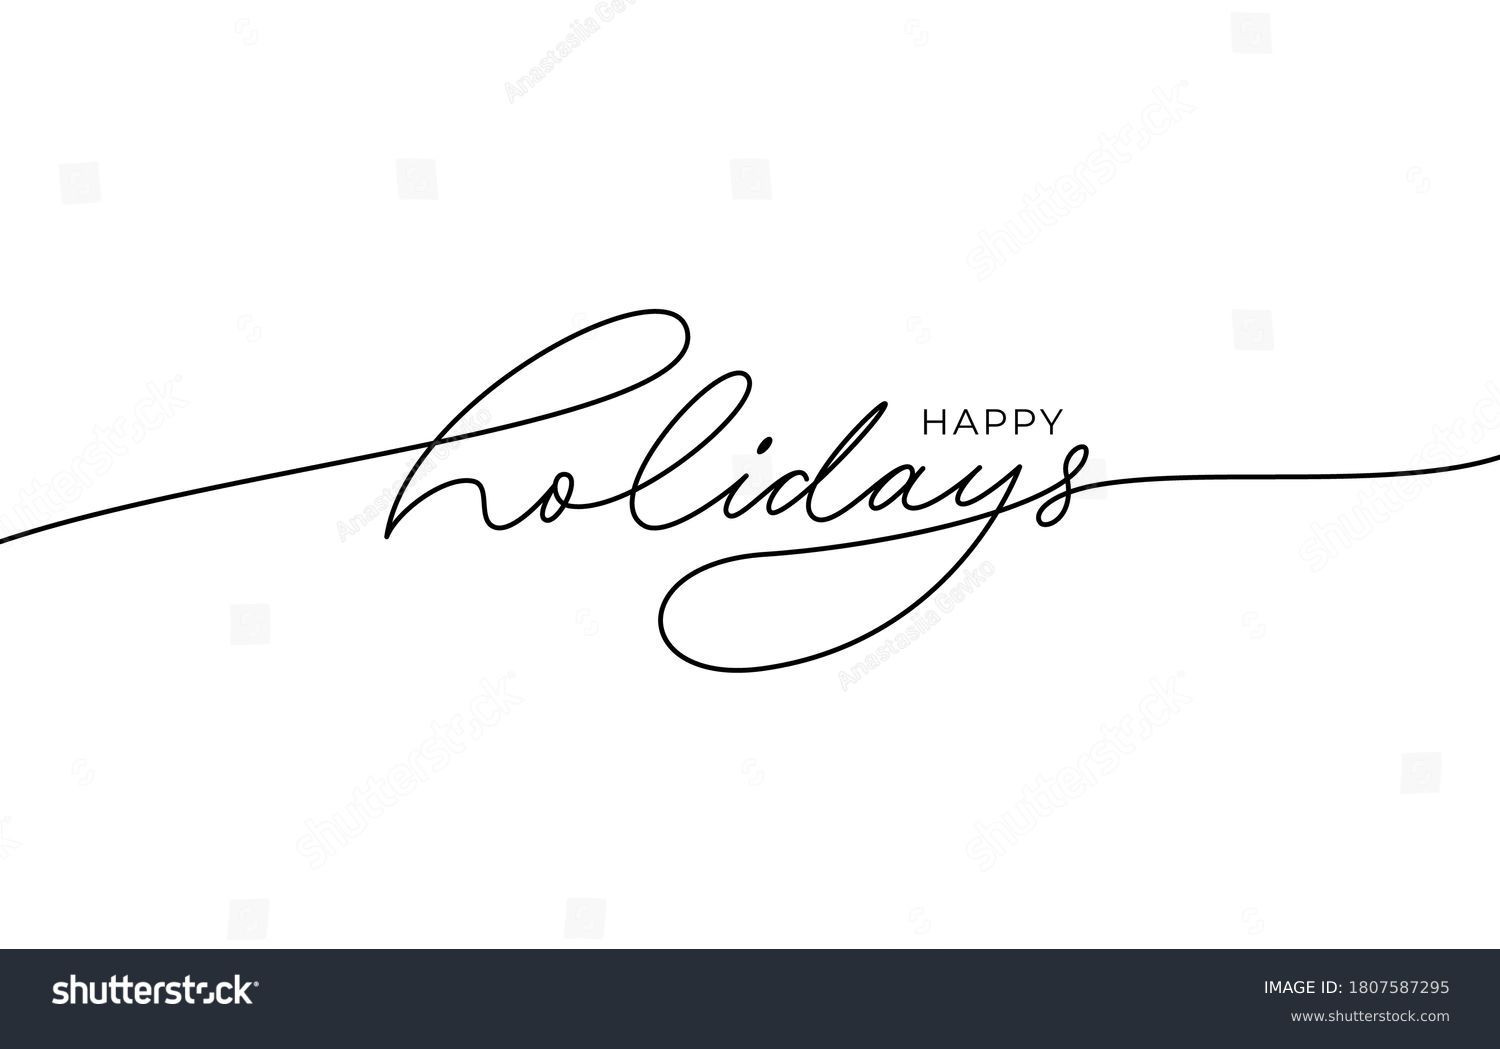 Happy holidays phrase. Modern pen vector calligraphy. Greeting holiday card, Christmas and New Year phrase. Ink illustration isolated on white. Hand lettering inscription to winter holiday design